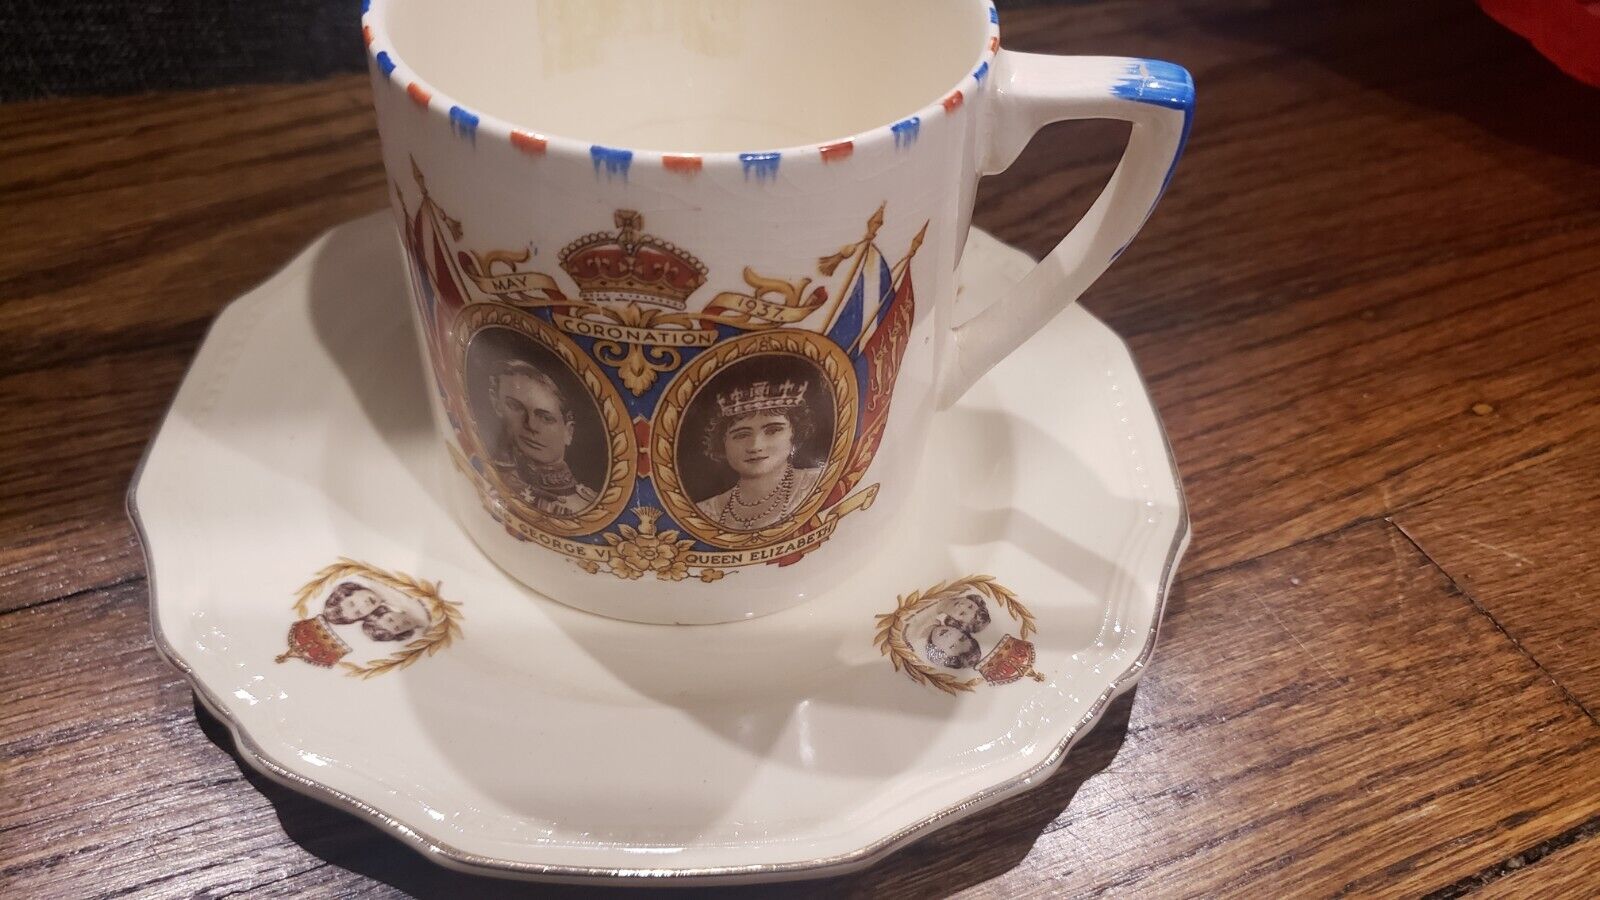 King George And Queen Mom cup and saucer - England 